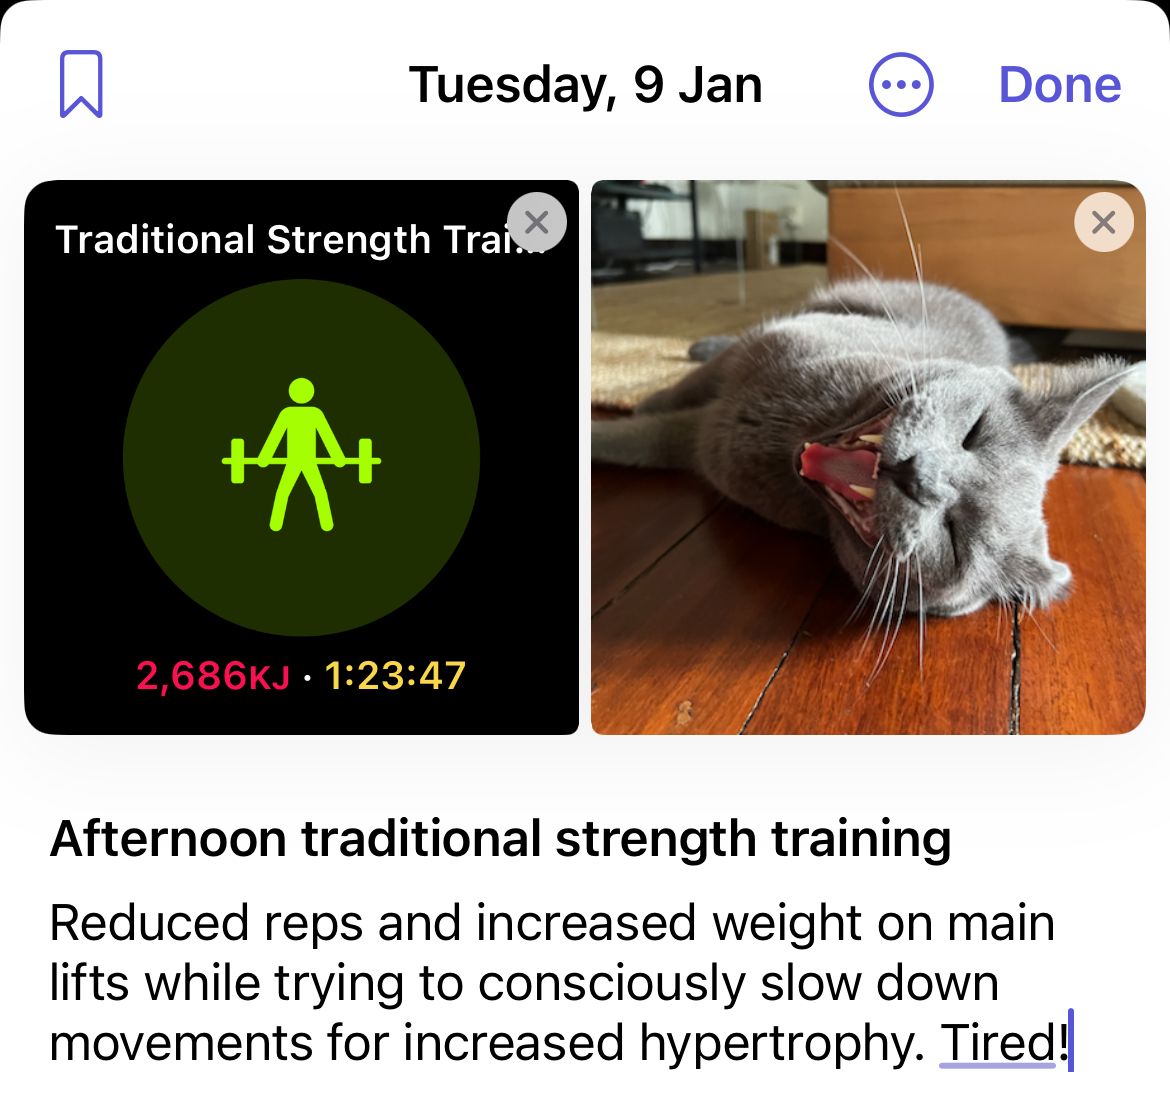 Recording a workout and photo within the same entry.